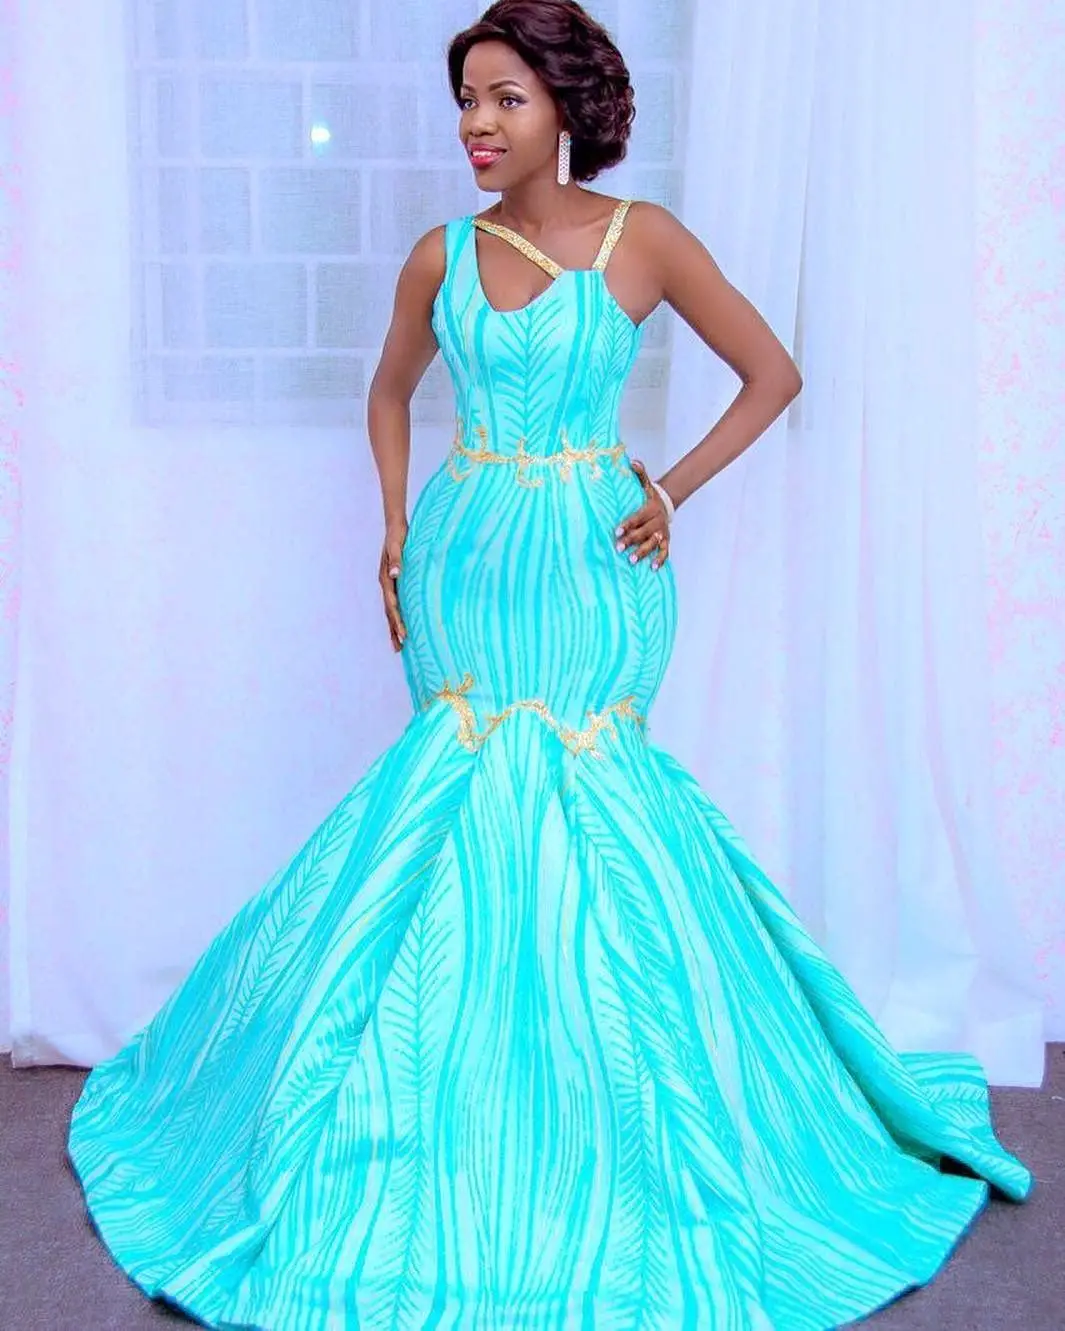 One Word For These Trendy Bridal Reception Outfits: Wow!!